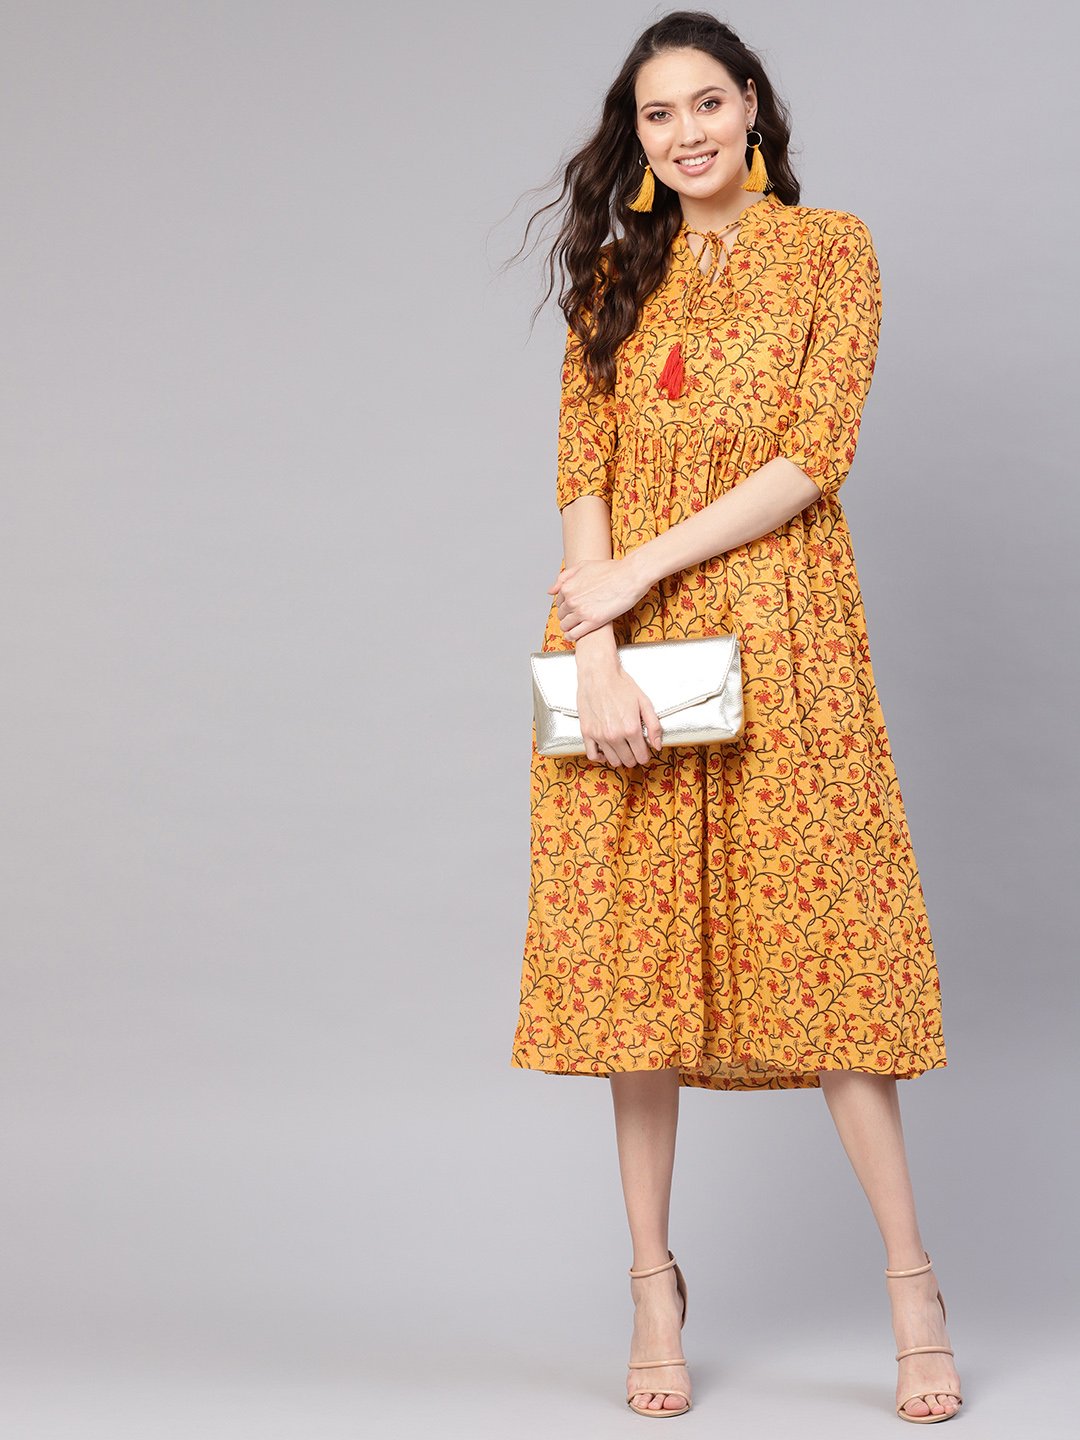 Women's Mustard Yellow & Red Printed A-Line Dress - Nayo Clothing